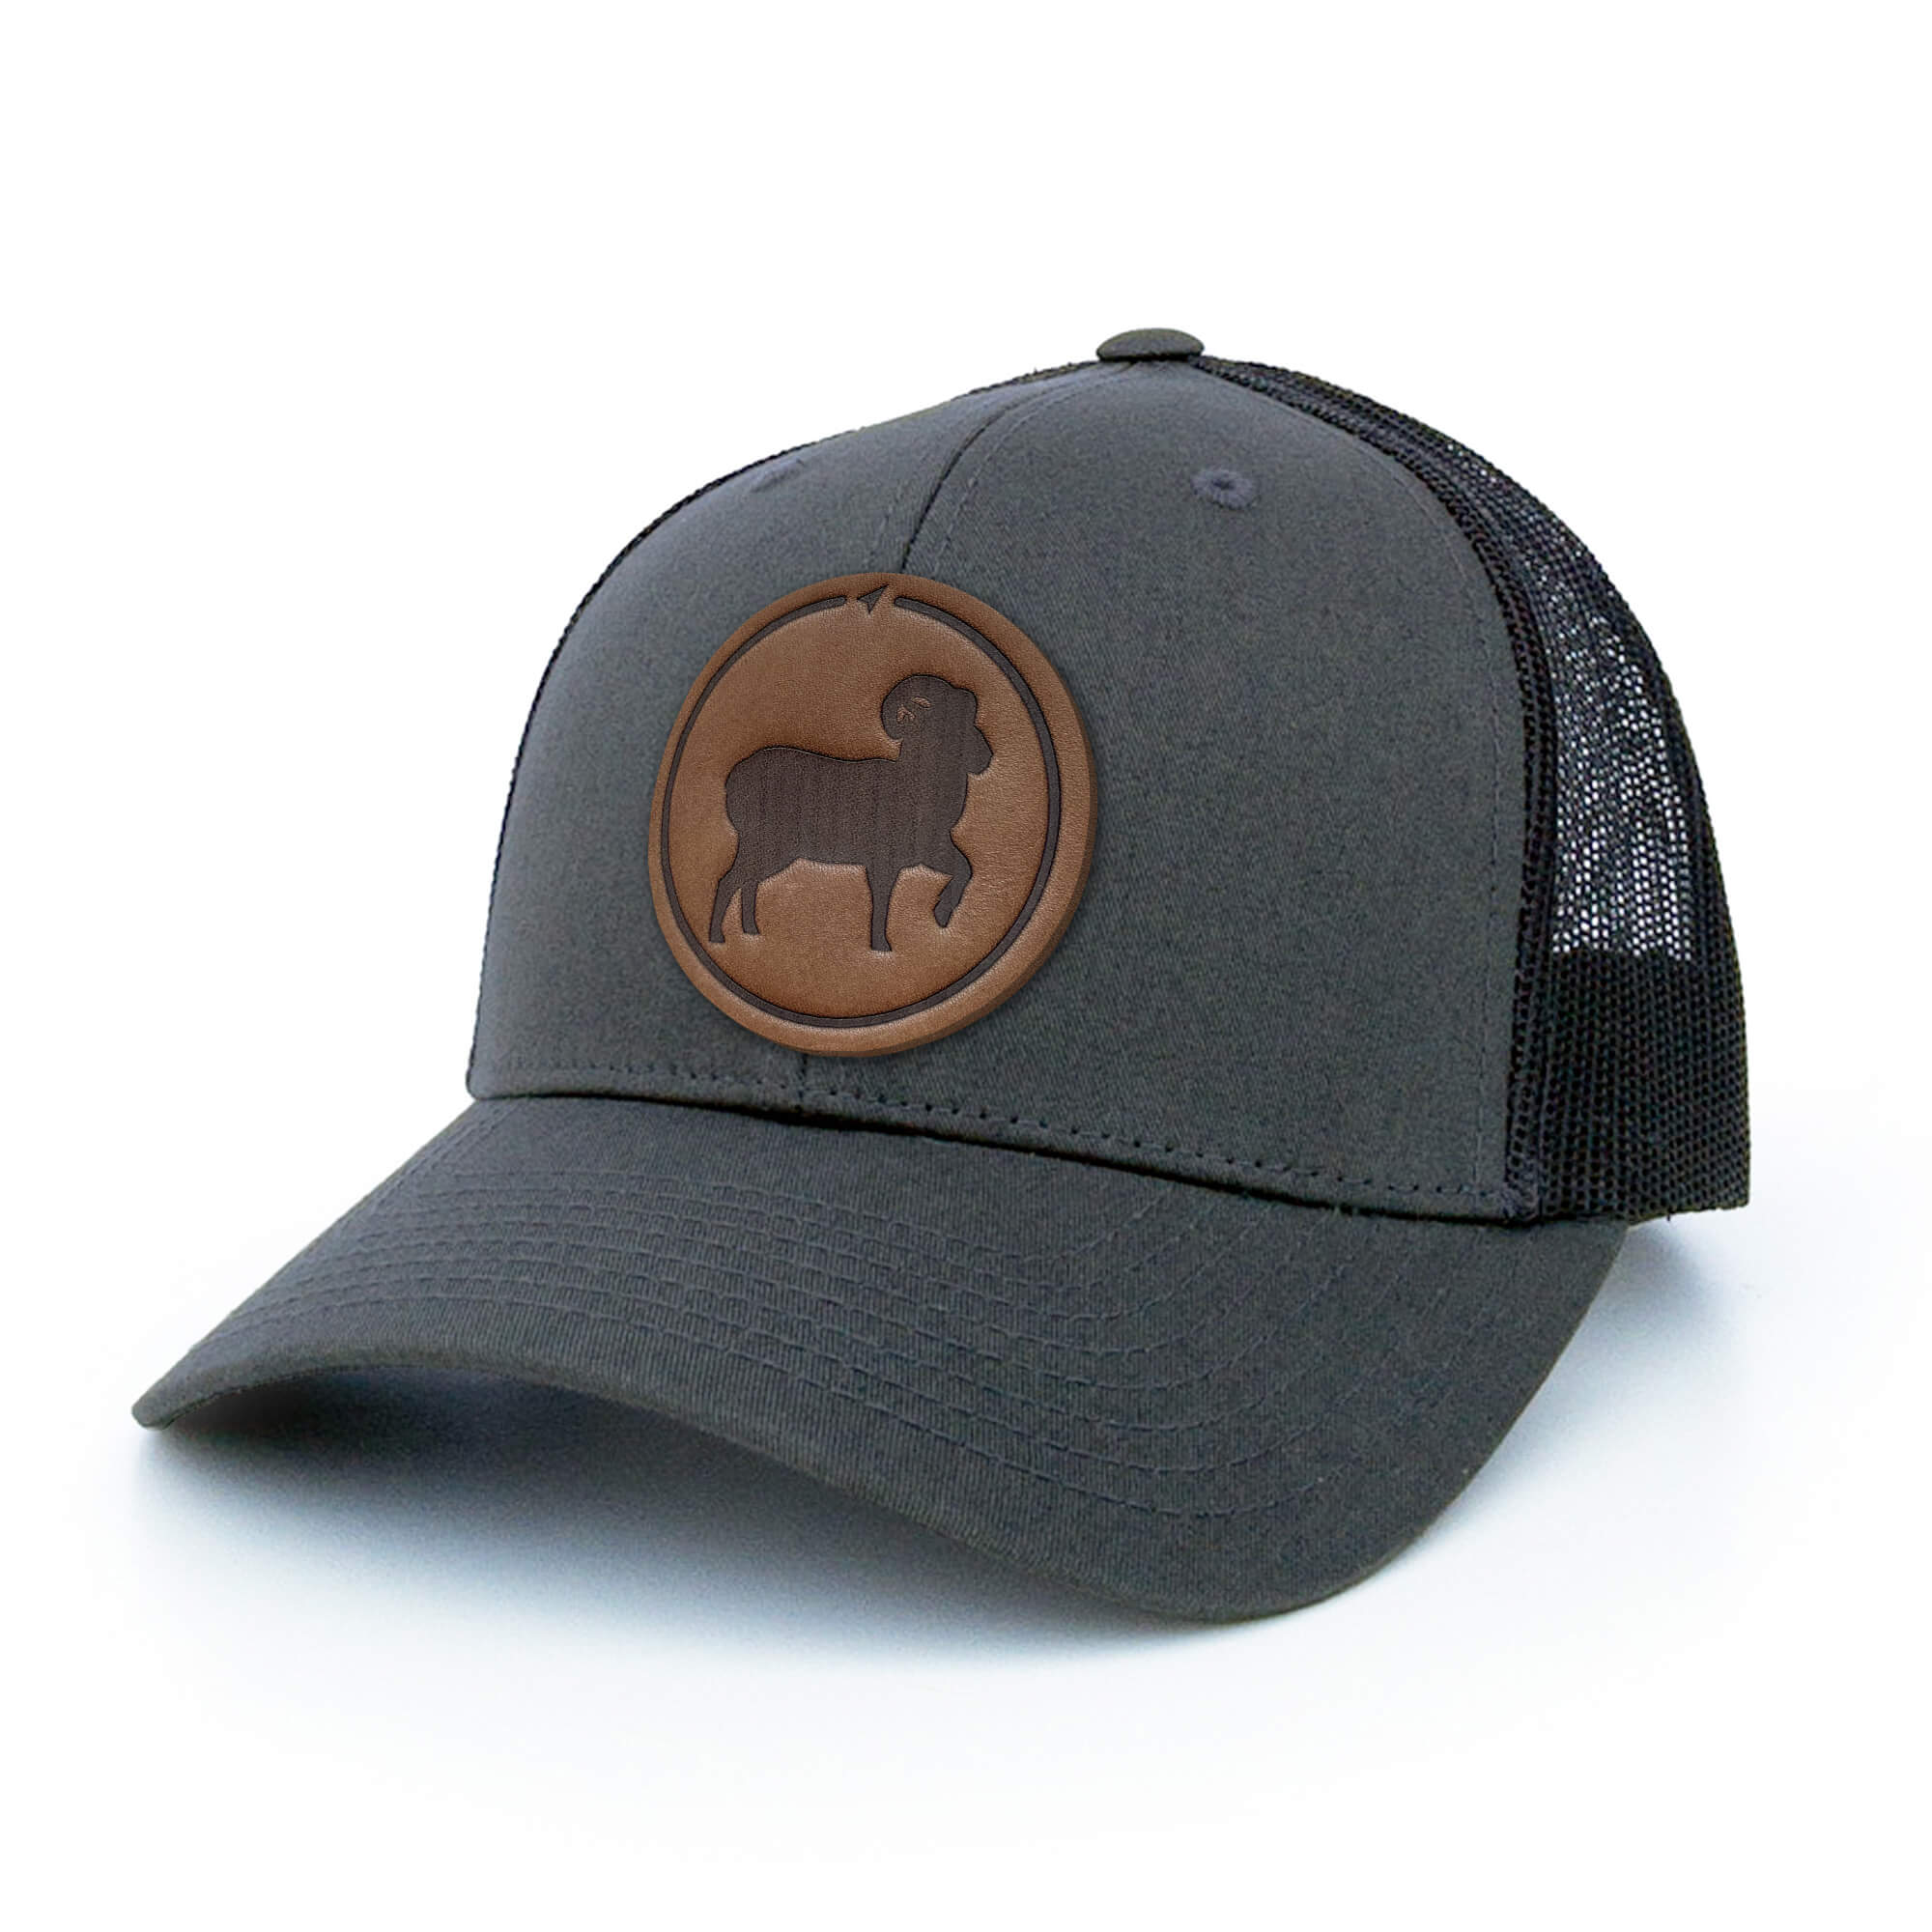 Charcoal trucker hat with full-grain leather patch of a Bighorn Sheep | BLACK-004-002, CHARC-004-002, NAVY-004-002, HGREY-004-002, MOSS-004-002, BROWN-004-002